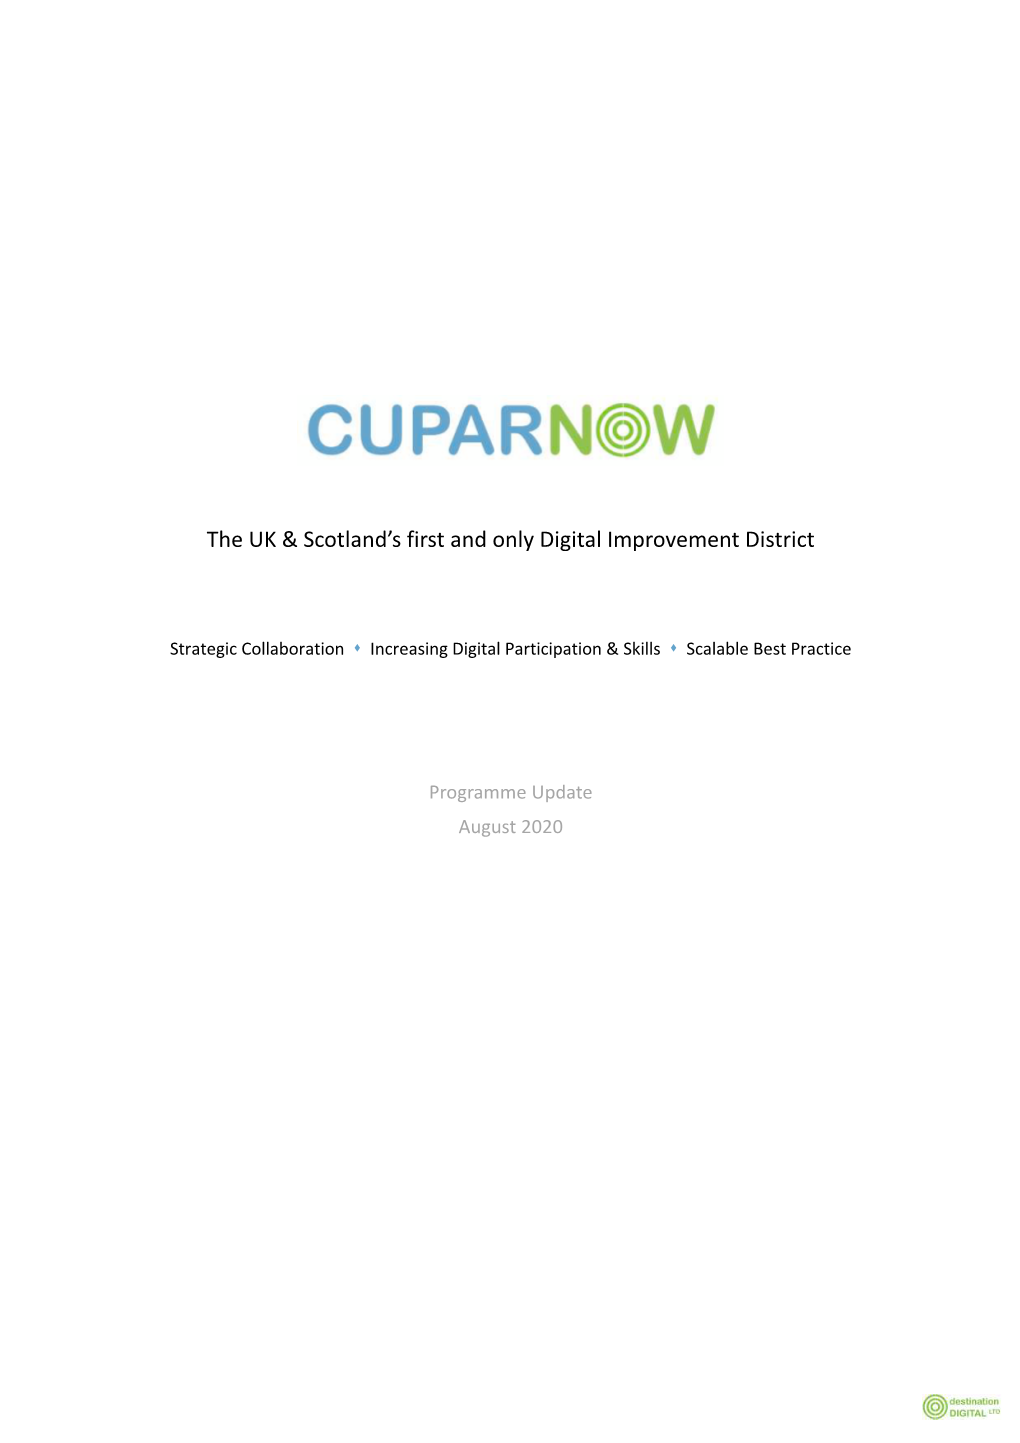 The UK & Scotland's First and Only Digital Improvement District